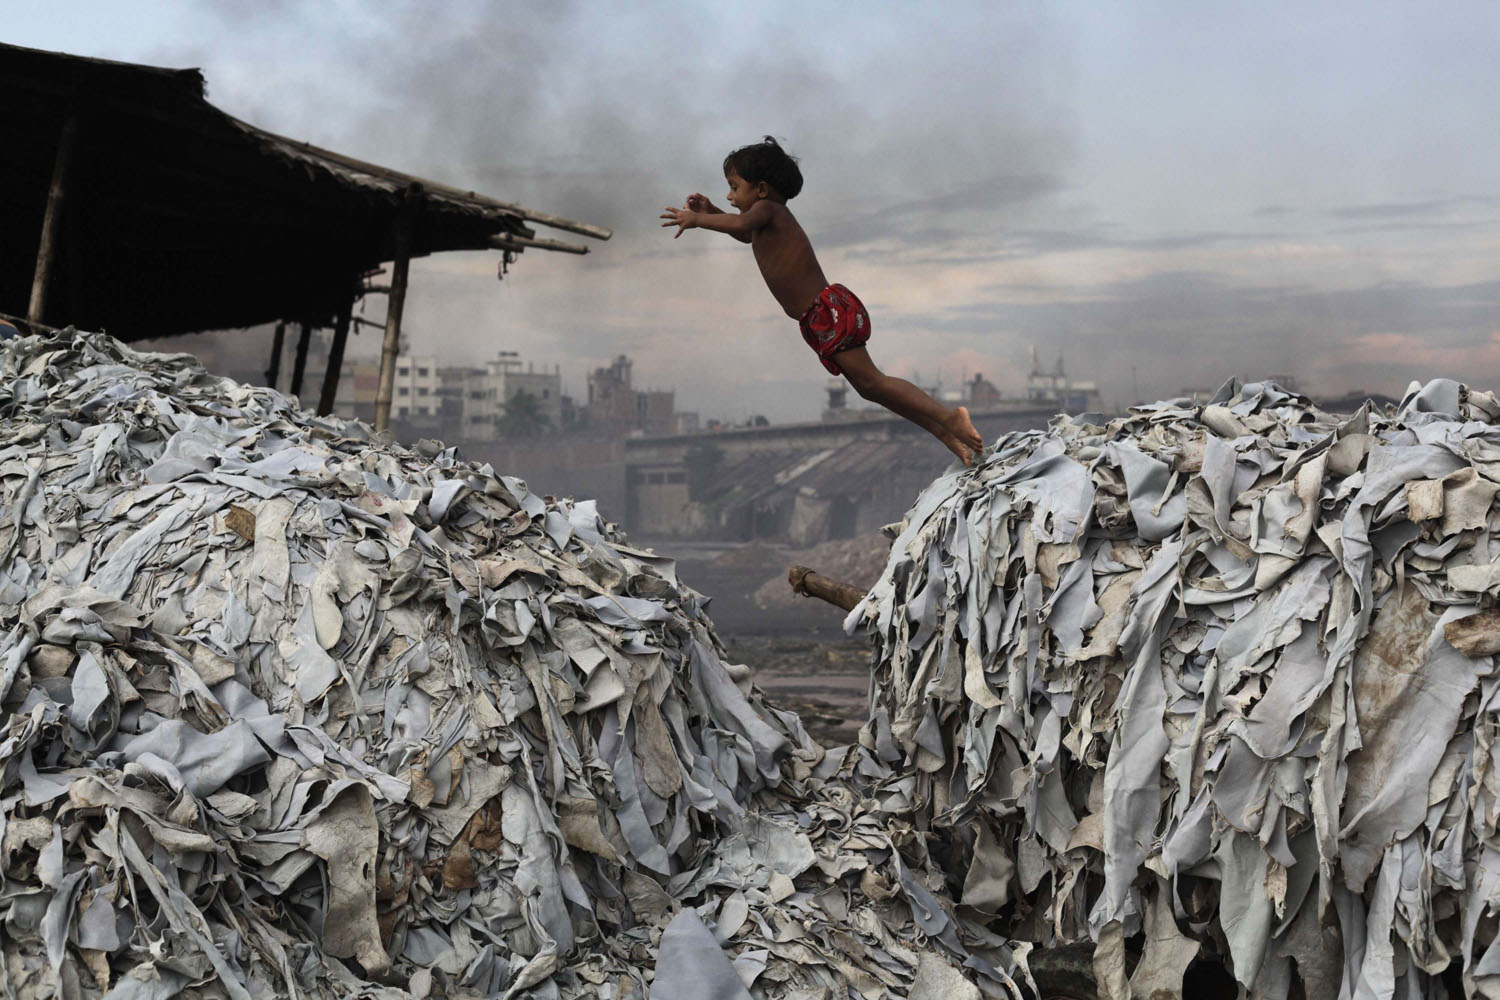 Oct. 9, 2012. A child jumps on the waste products that are used to make poultry feed as she plays in a tannery at Hazaribagh in Dhaka, Bangladesh. Luxury leather goods sold across the world are produced in a slum area of Bangladesh's capital where workers, including children, are exposed to hazardous chemicals and often injured in horrific accidents, according to a study released on Tuesday.